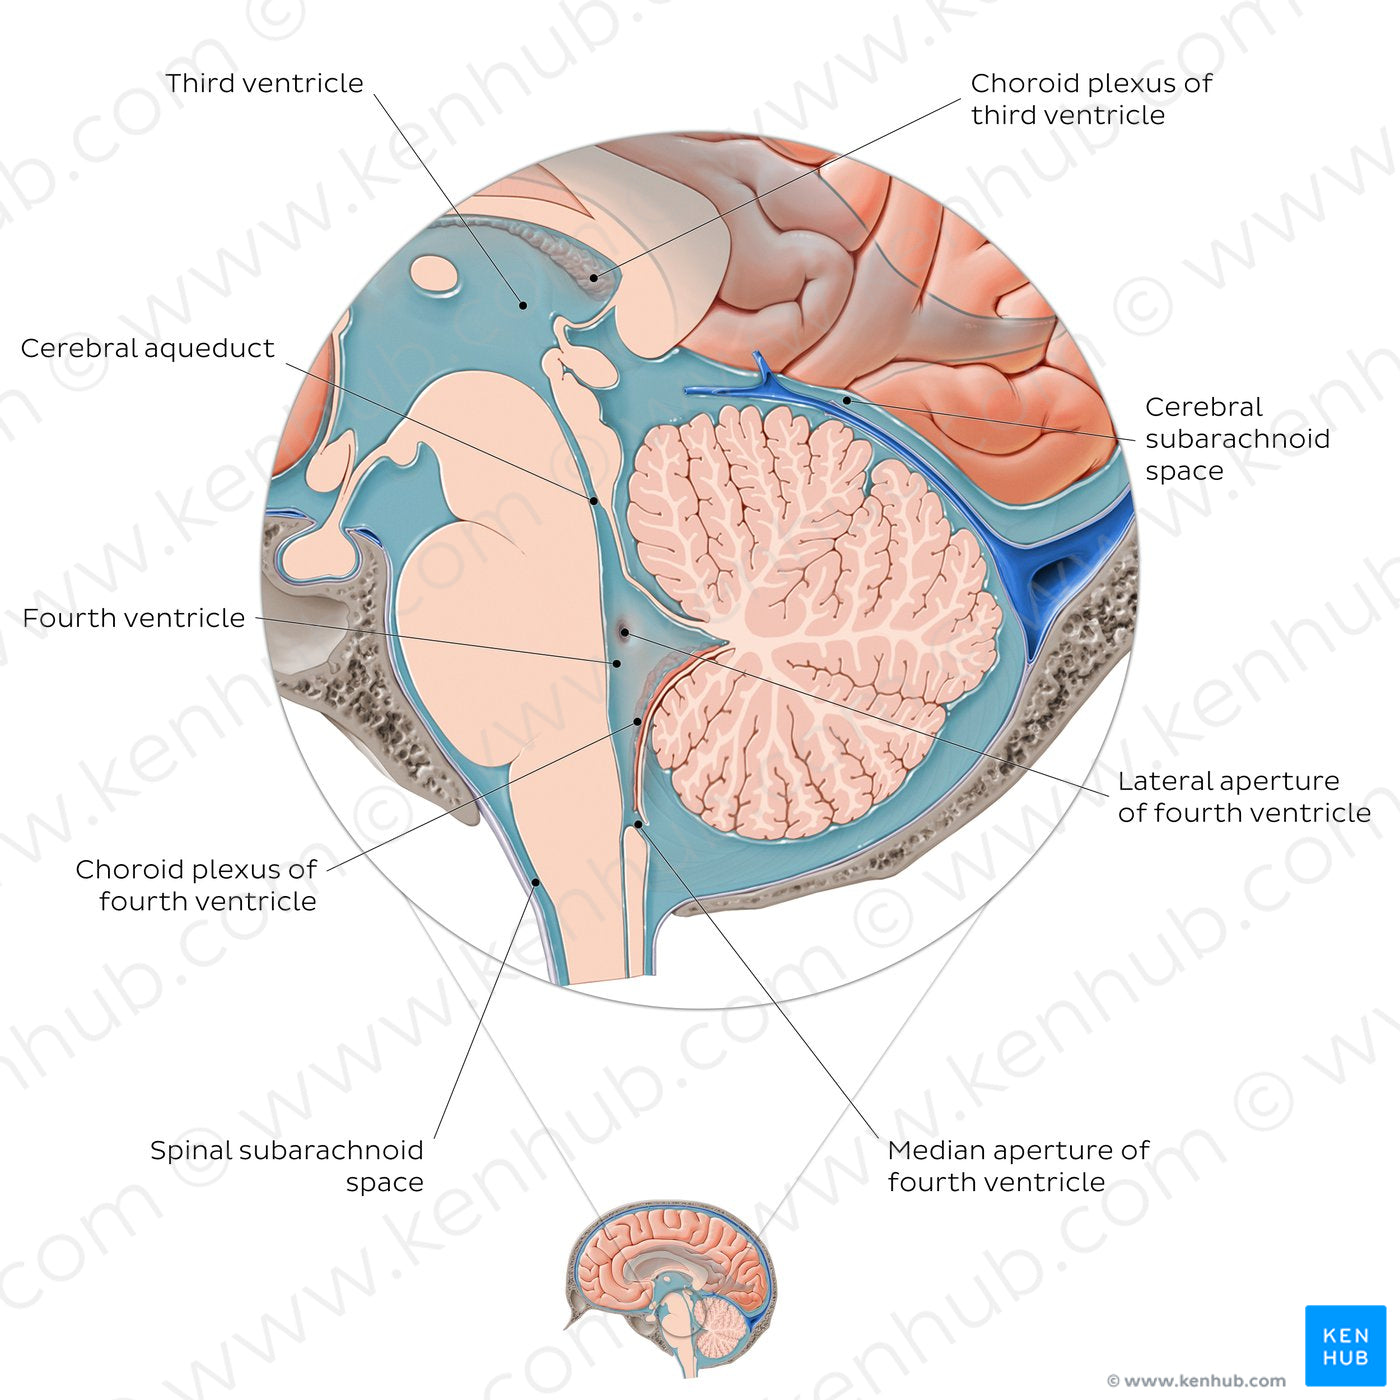 Ventricles and subarachnoid space of the brain (English)